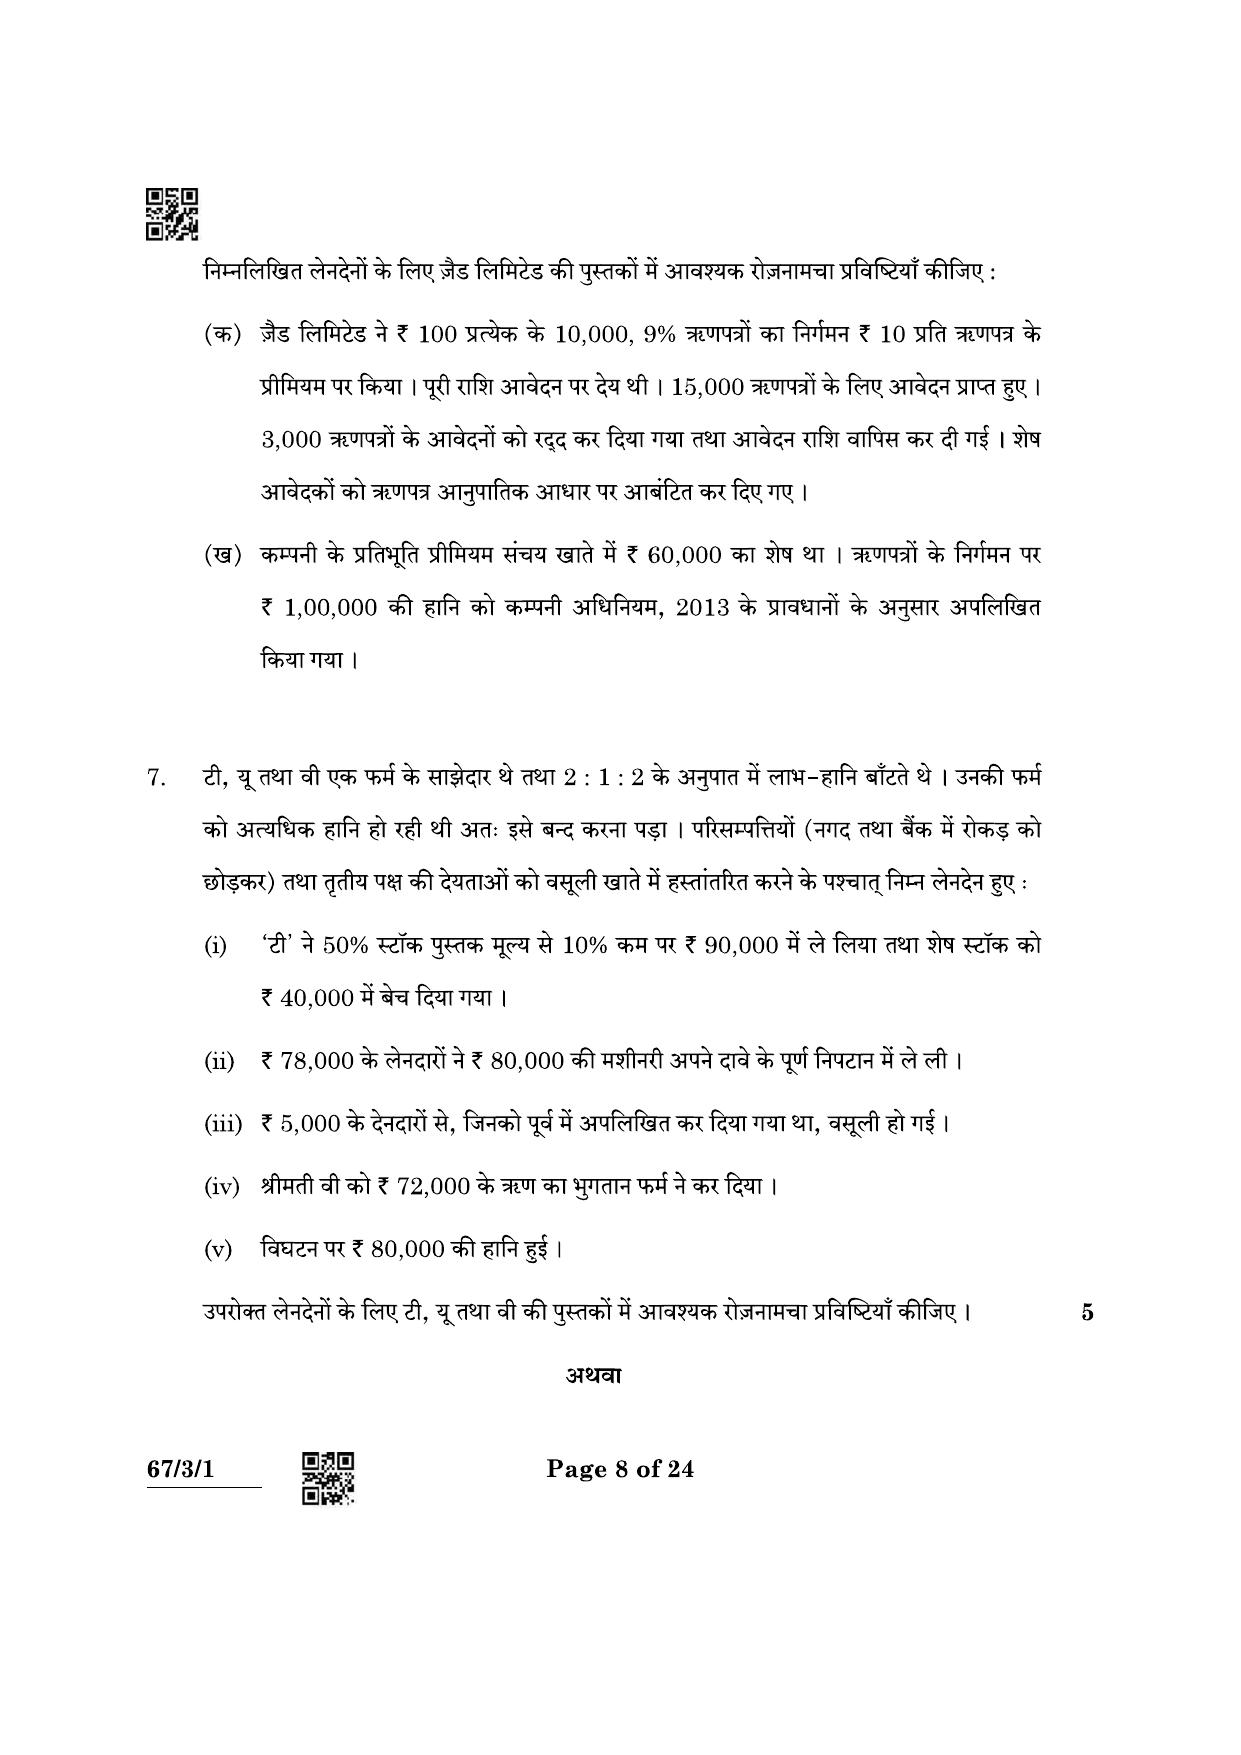 CBSE Class 12 67-3-1 Accountancy 2022 Question Paper - Page 8